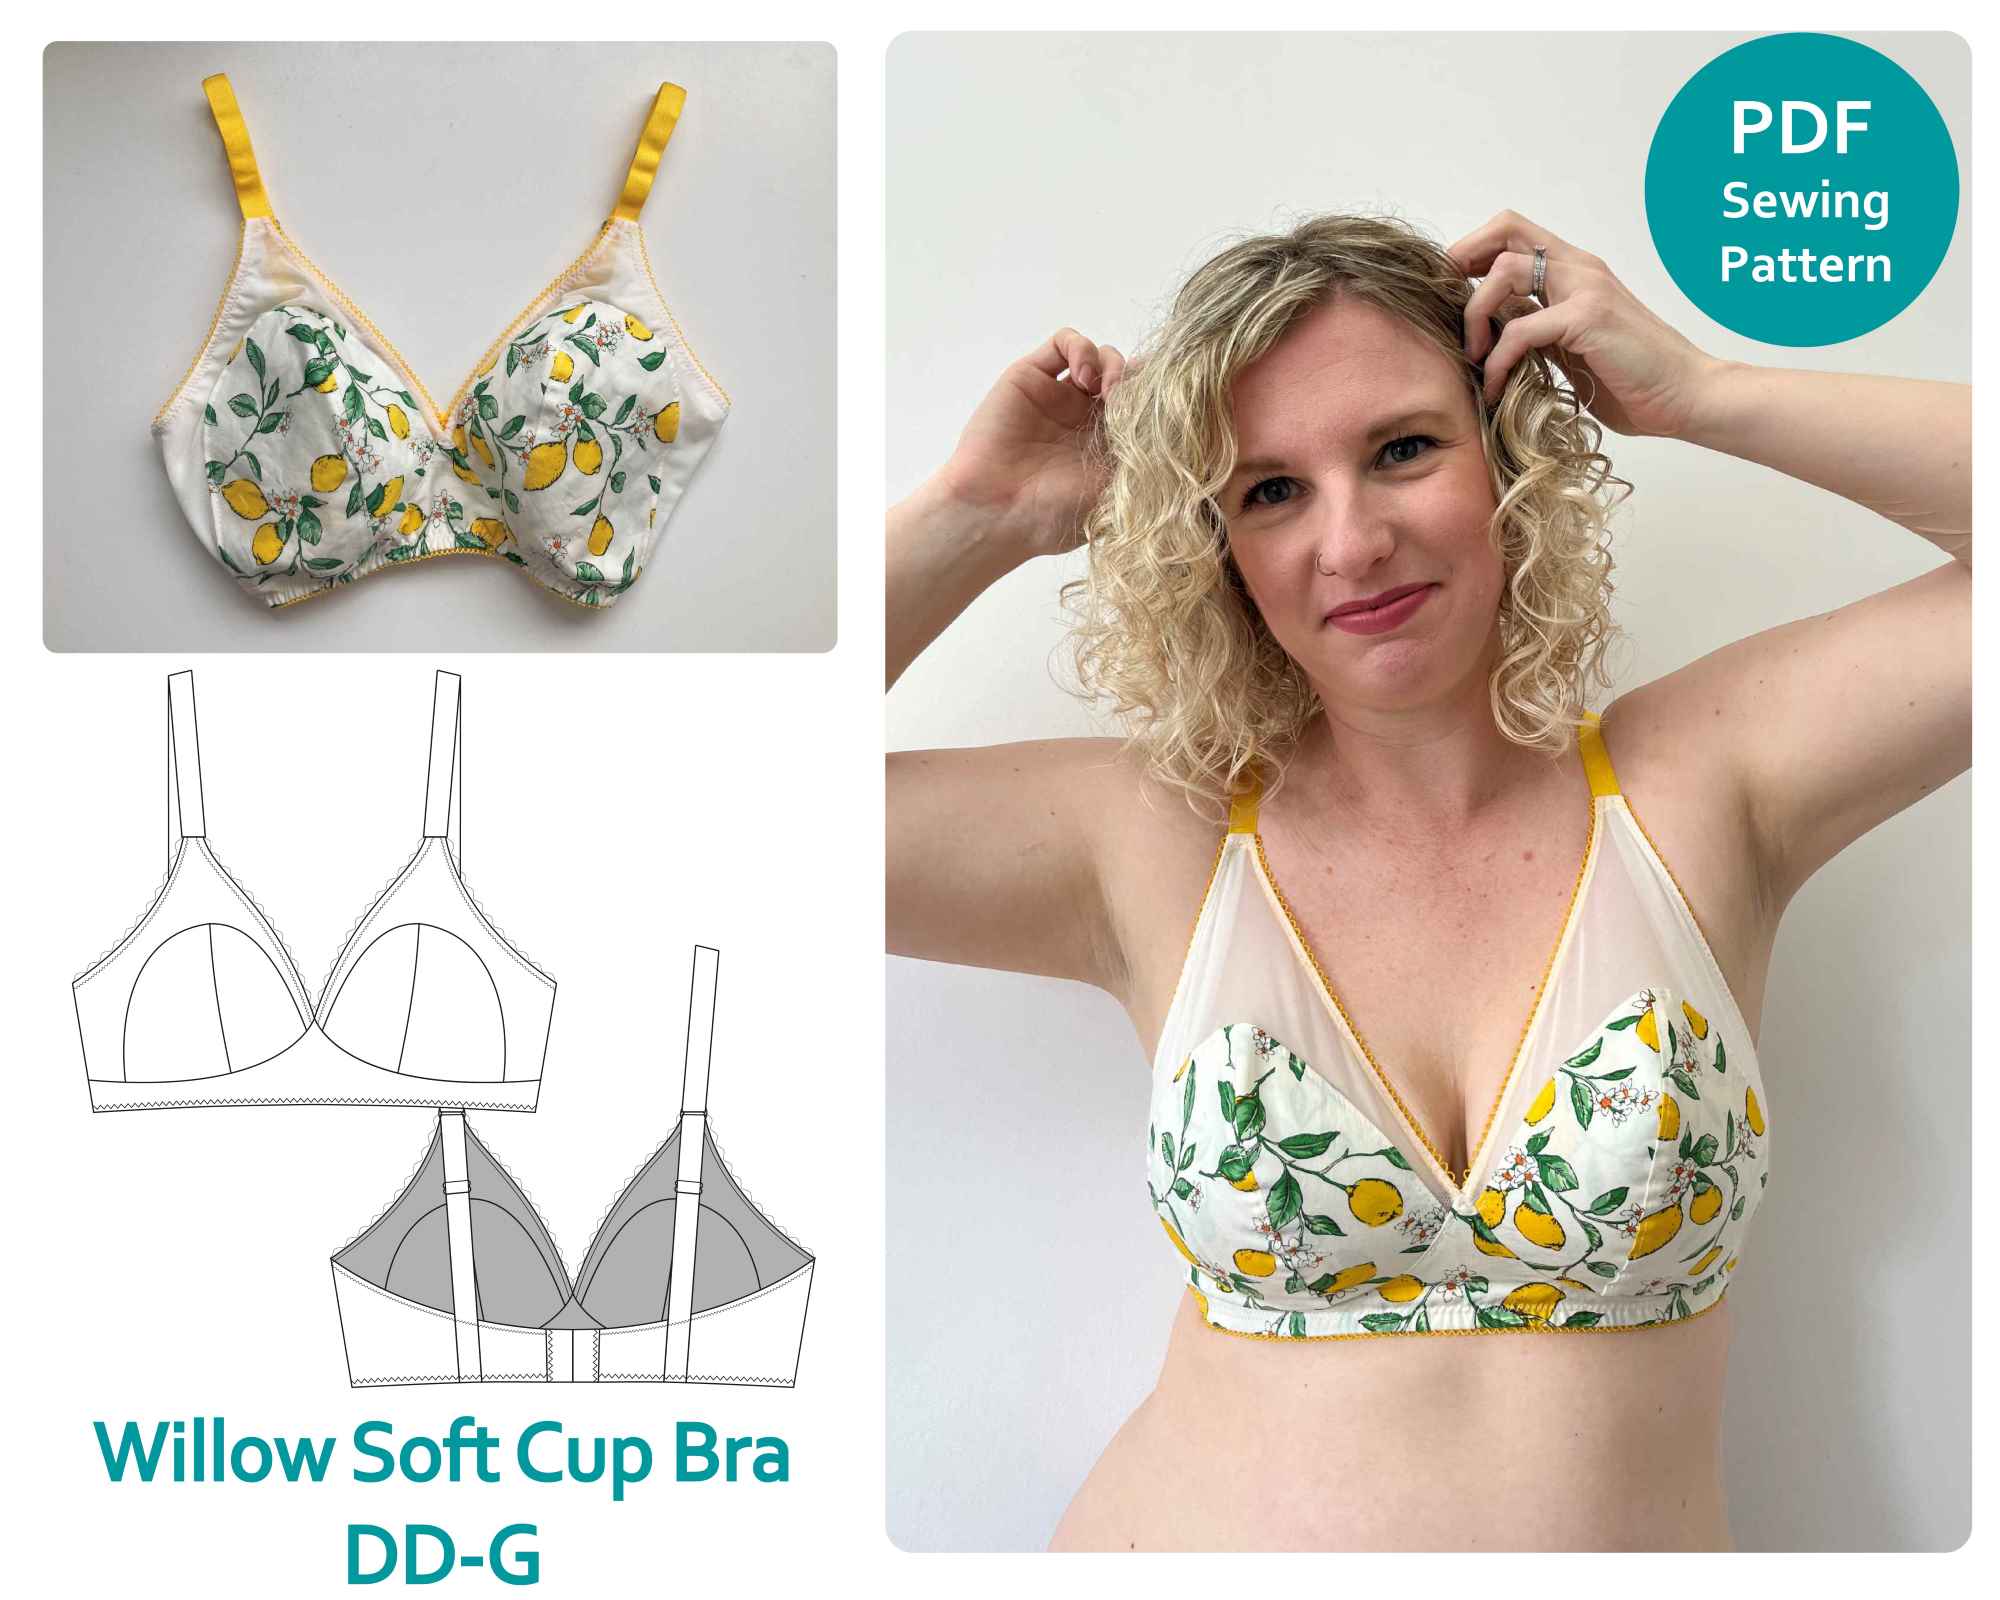 Willow Soft cup bra Full bust sewing pattern